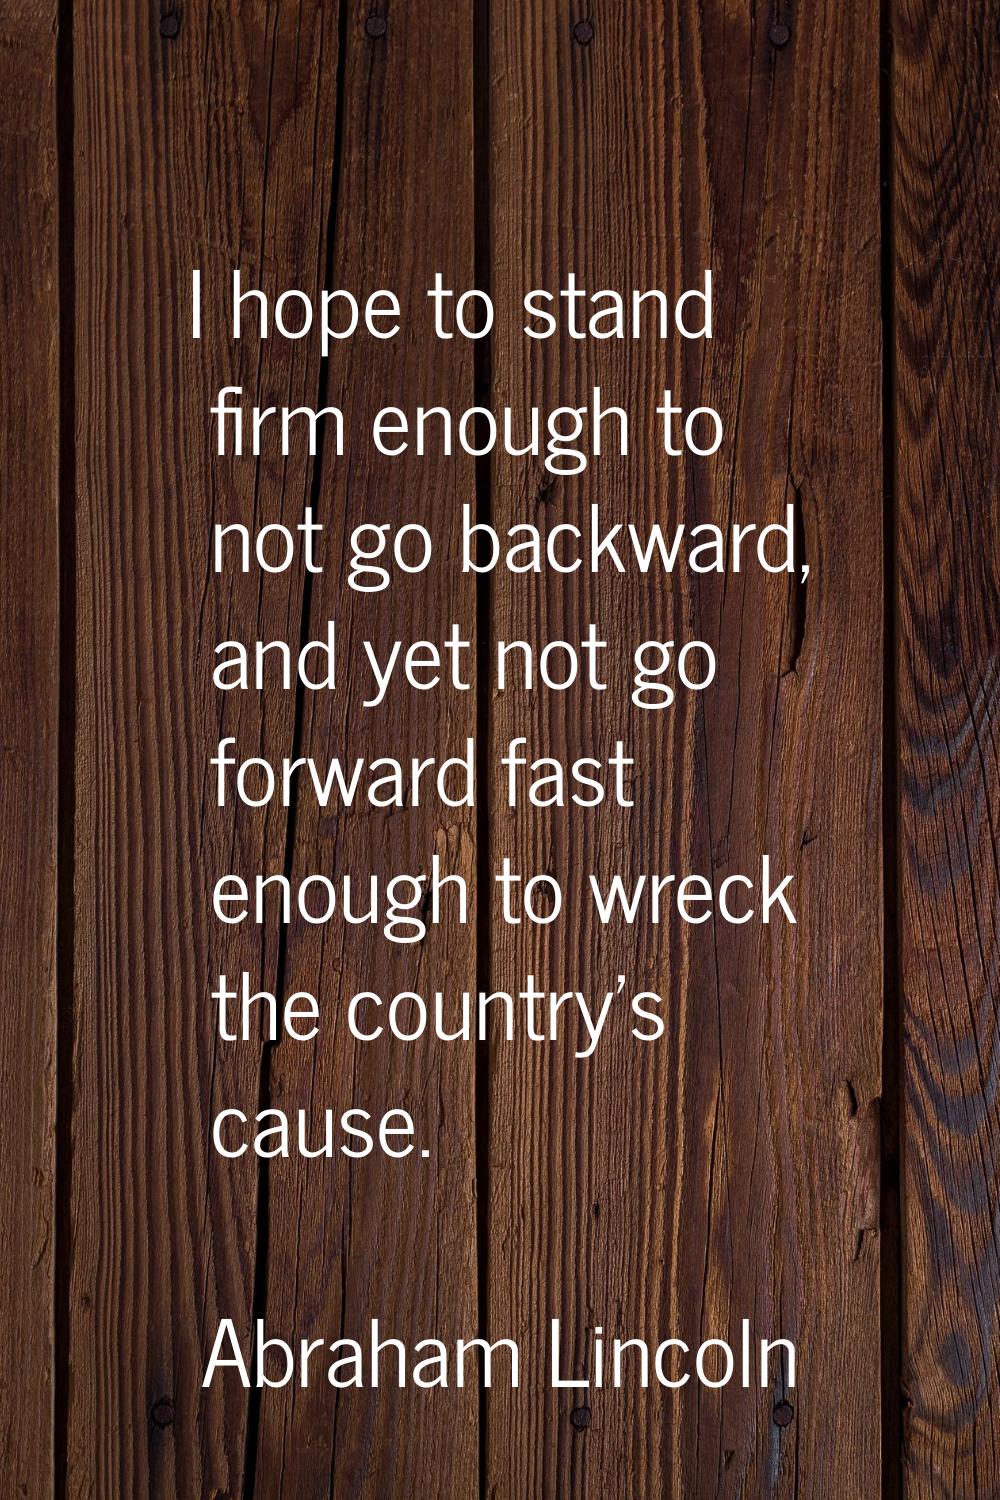 I hope to stand firm enough to not go backward, and yet not go forward fast enough to wreck the cou